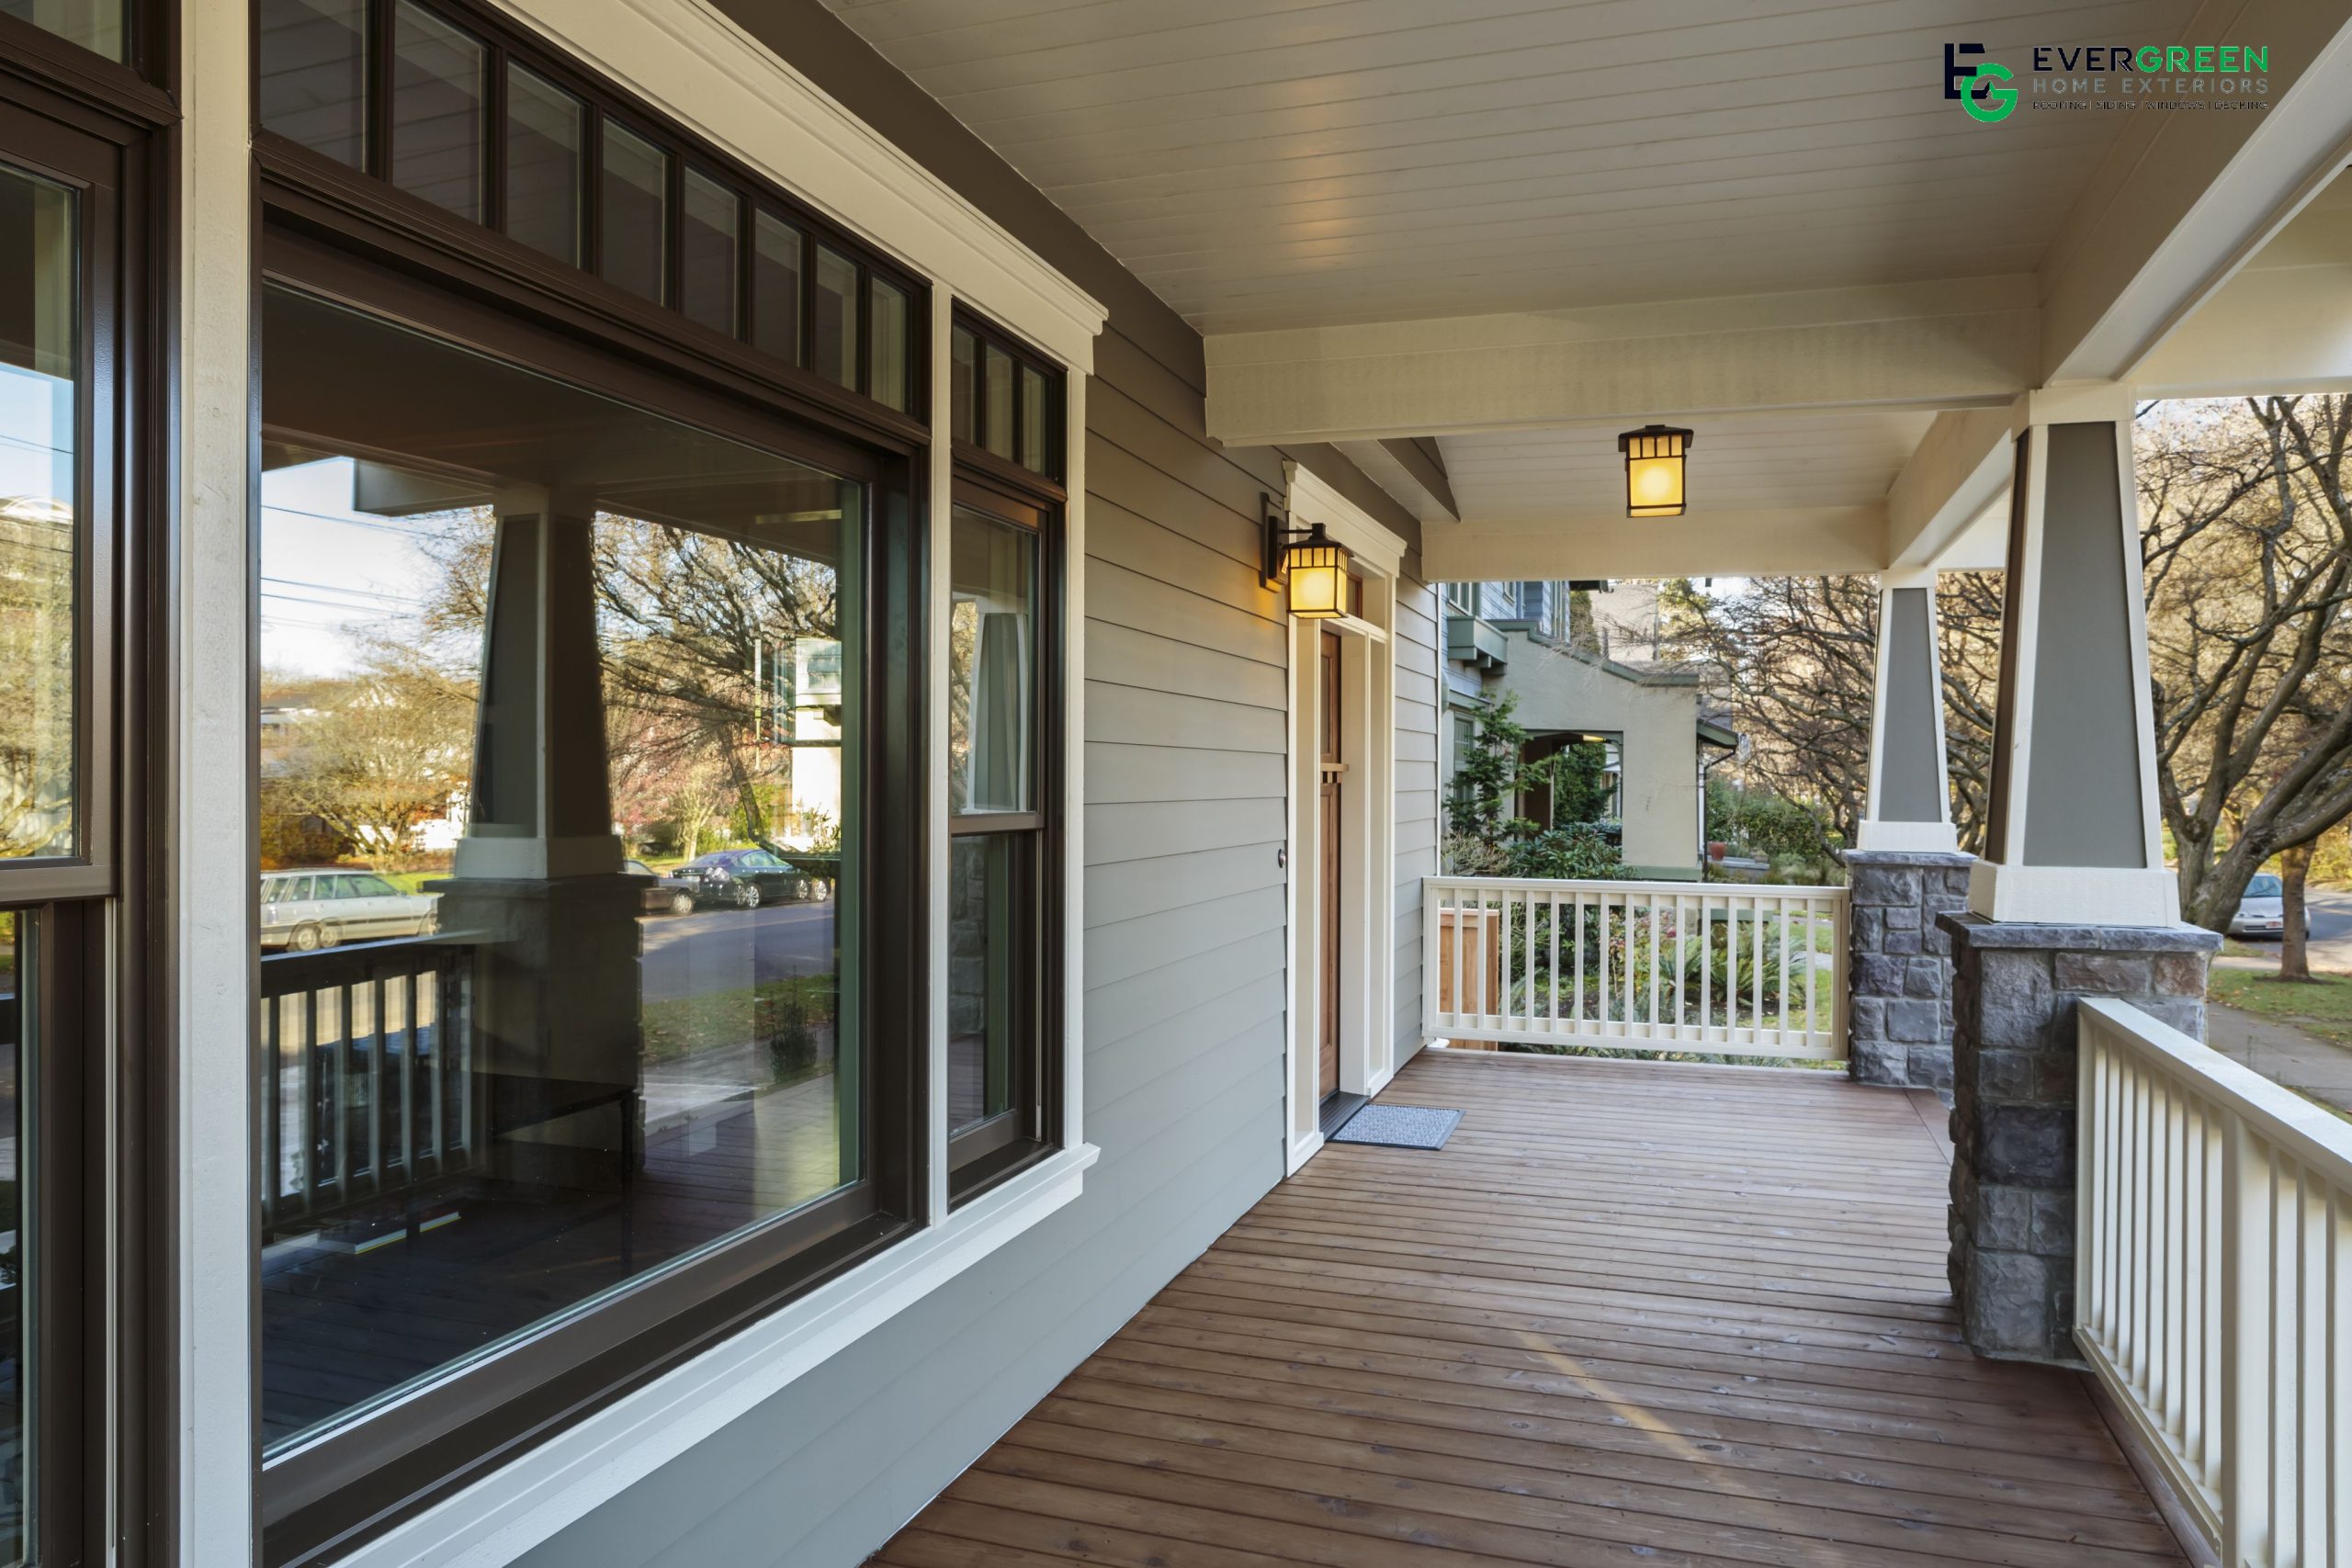 Outdoor Porch in Shambles? Look to Evergreen Home Exteriors for Pro Repairs!